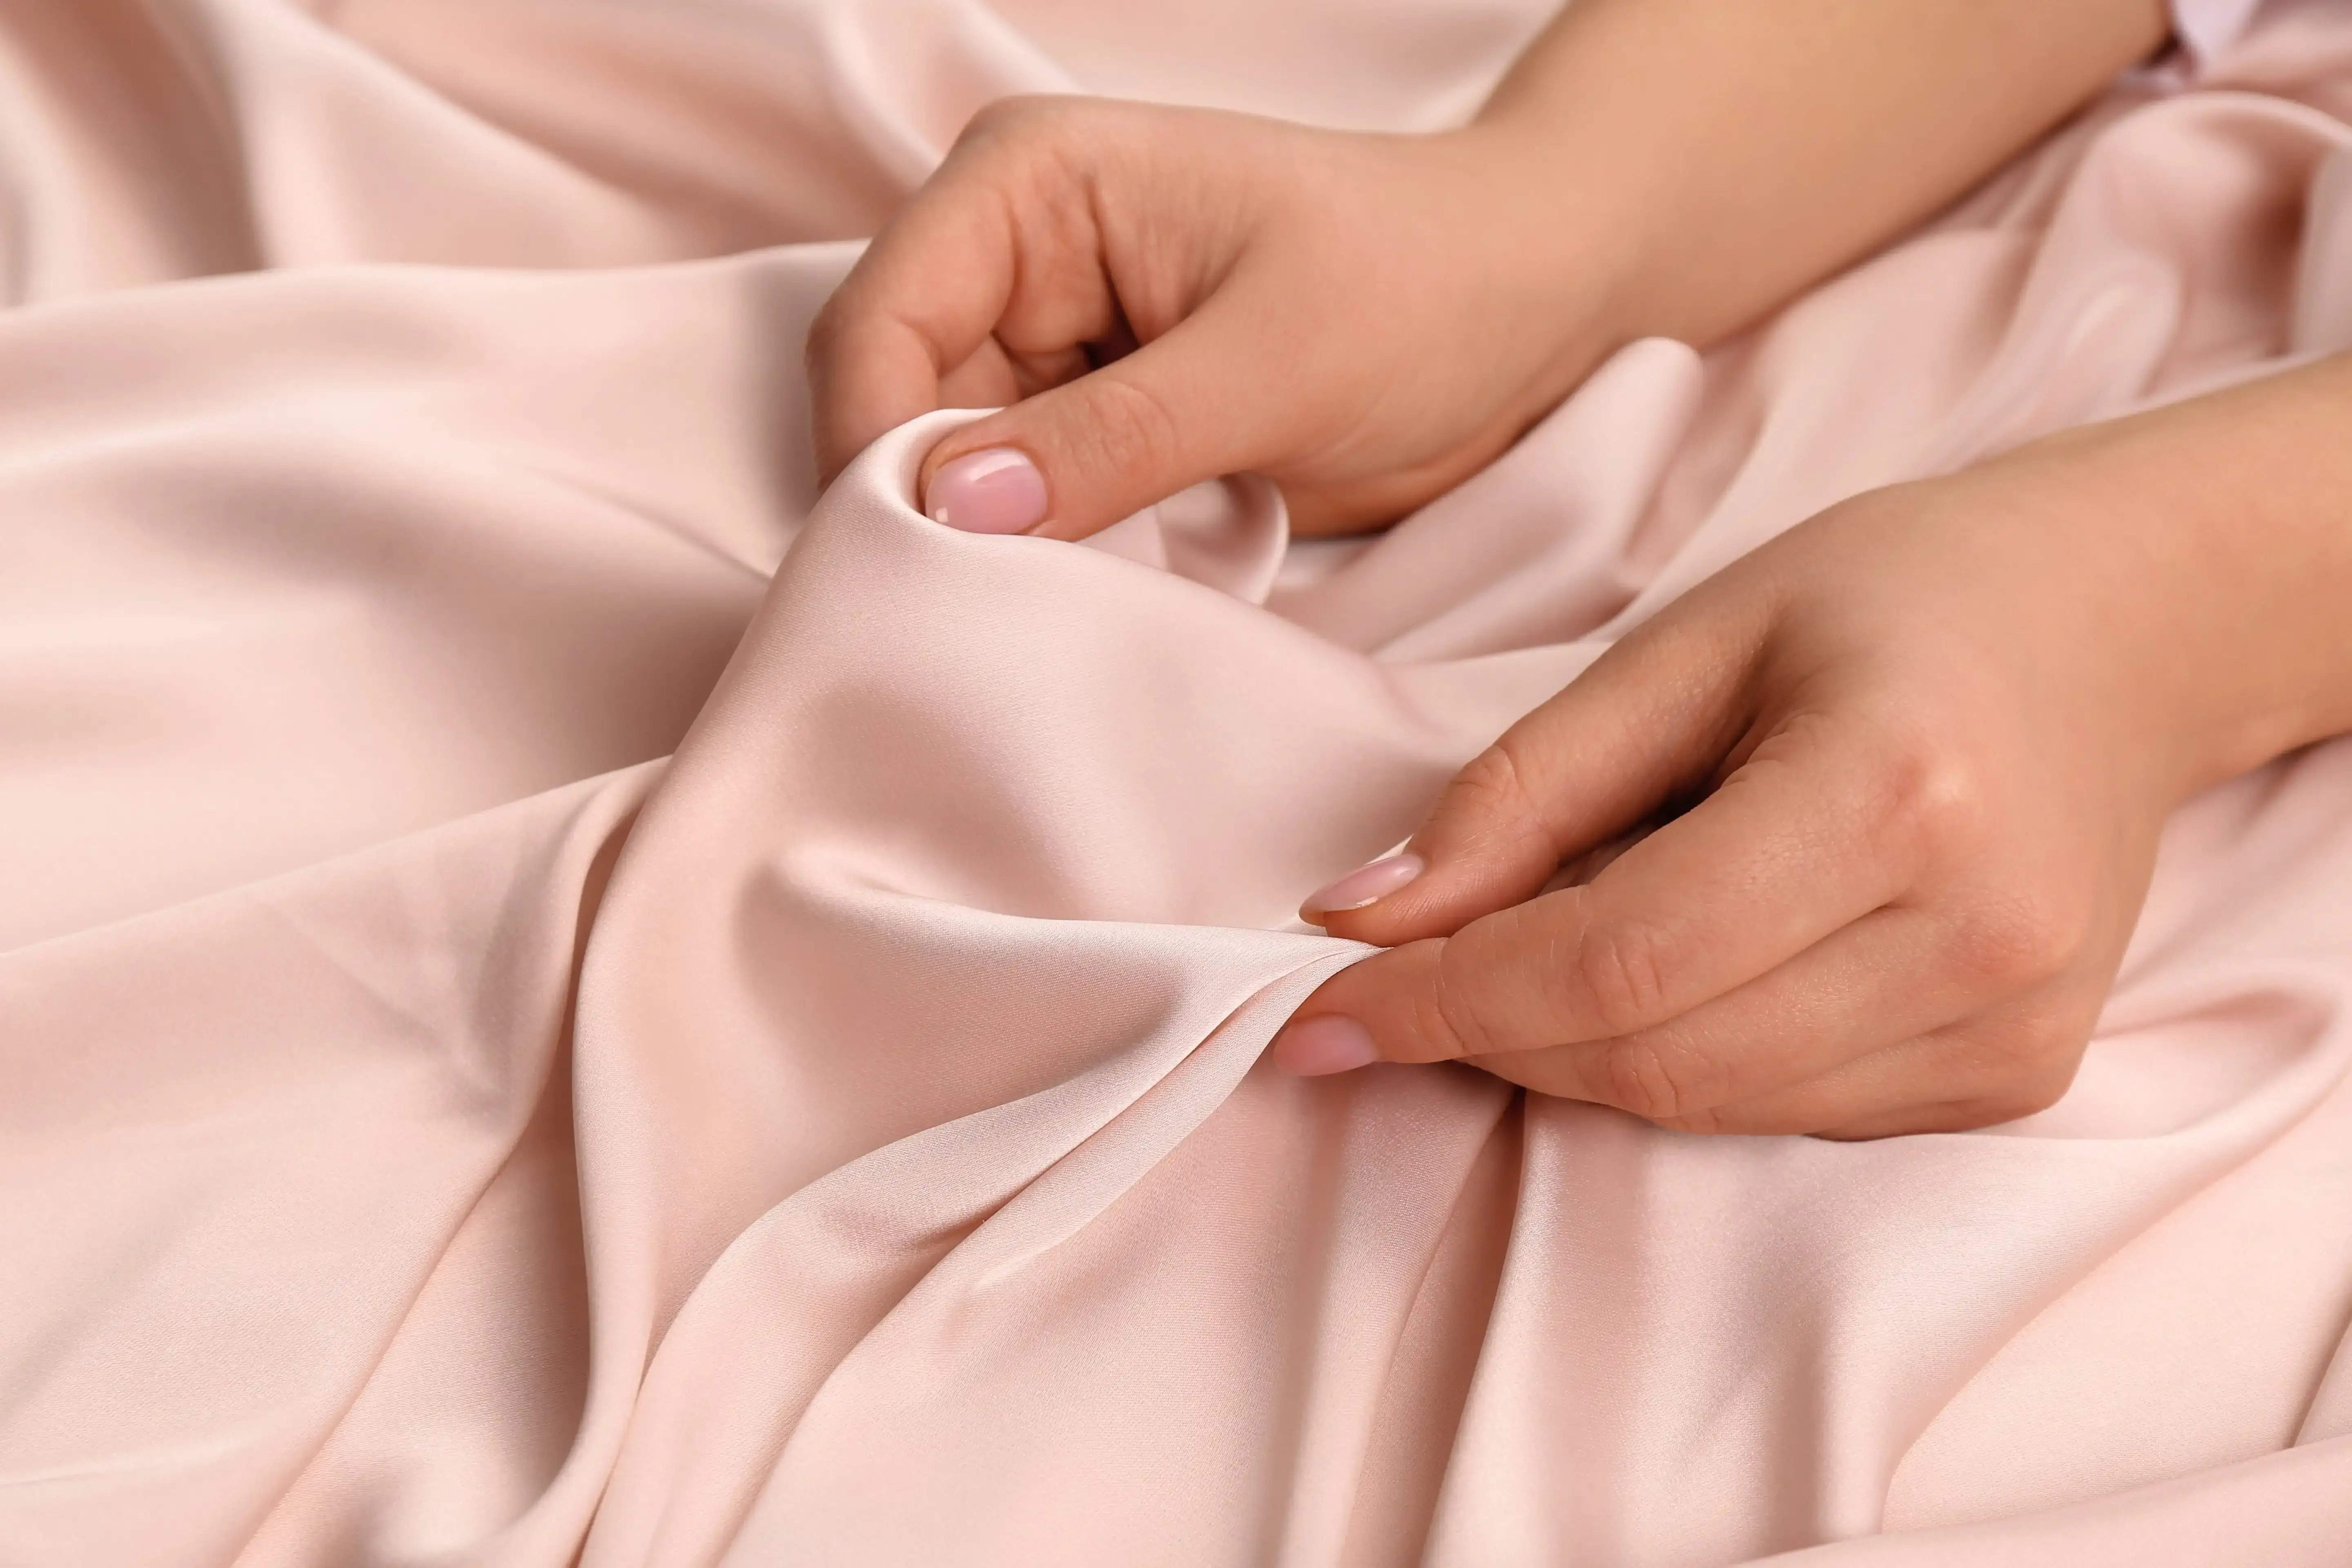 Hands gently examining a piece of satin fabric.